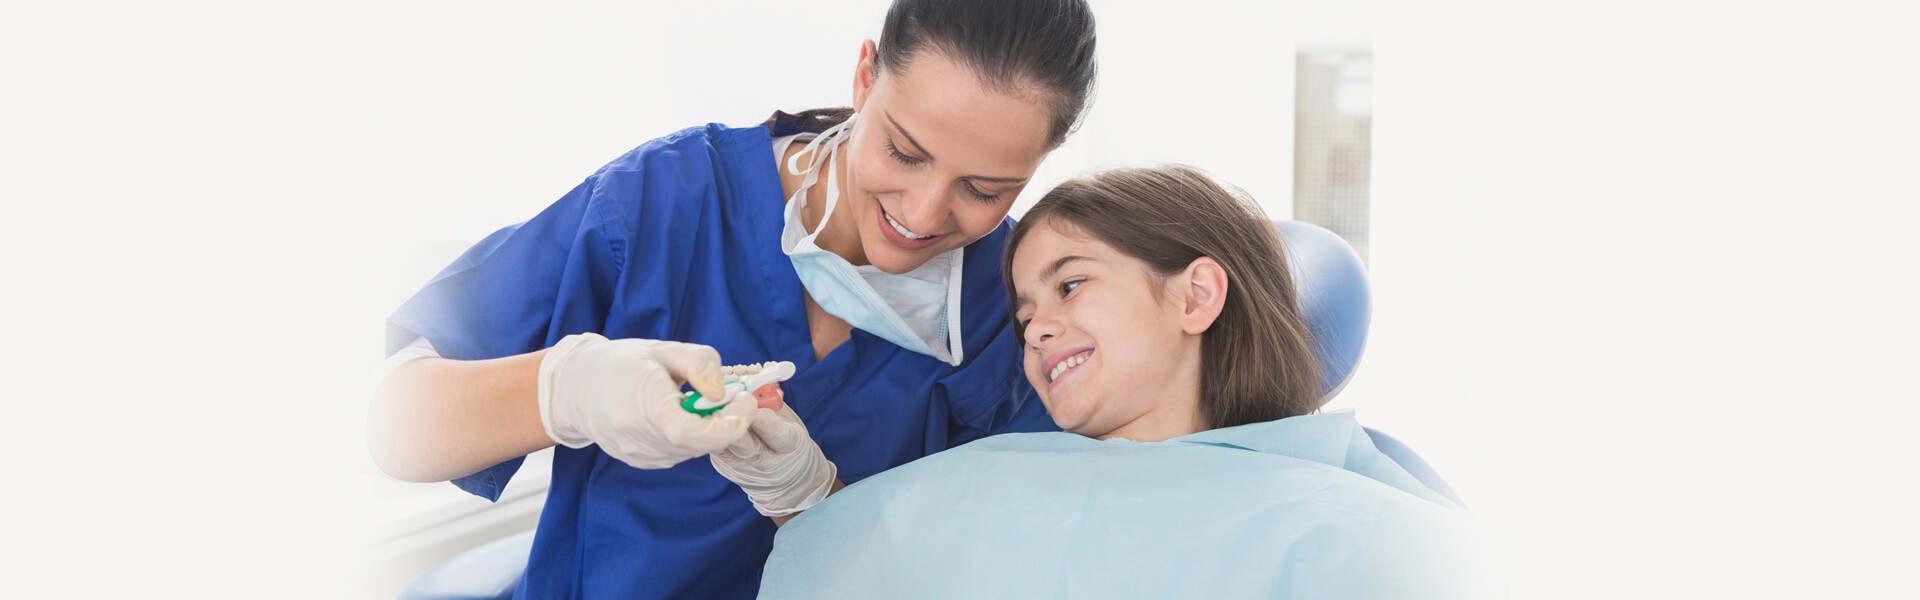 Fluoride Treatment for Kids Can Help to Prevent Tooth Decay